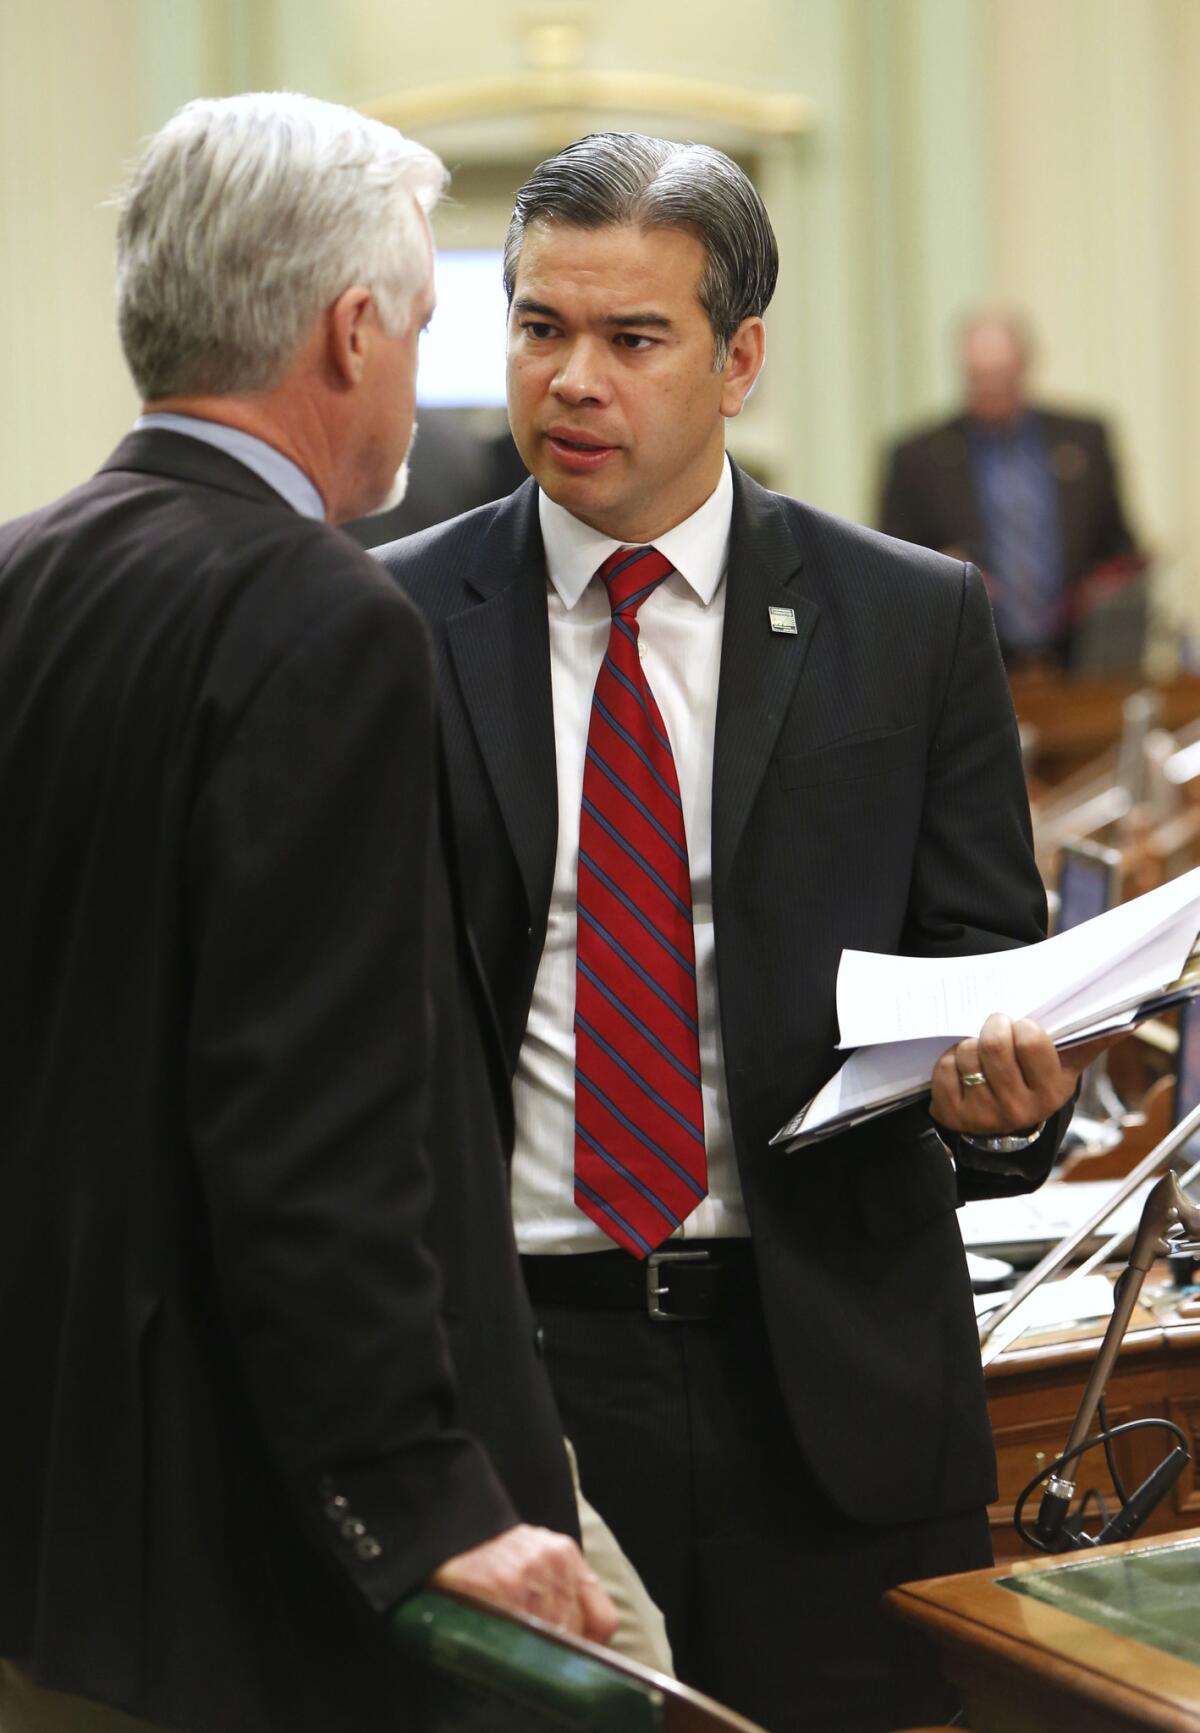 Assemblyman Rob Bonta (D-Oakland), right, talks with Assemblyman Wes Chesbro (D-Arcata) at the Capitol in Sacramento. Bonta introduced a measure that will allow noncitizens to volunteer as poll workers.